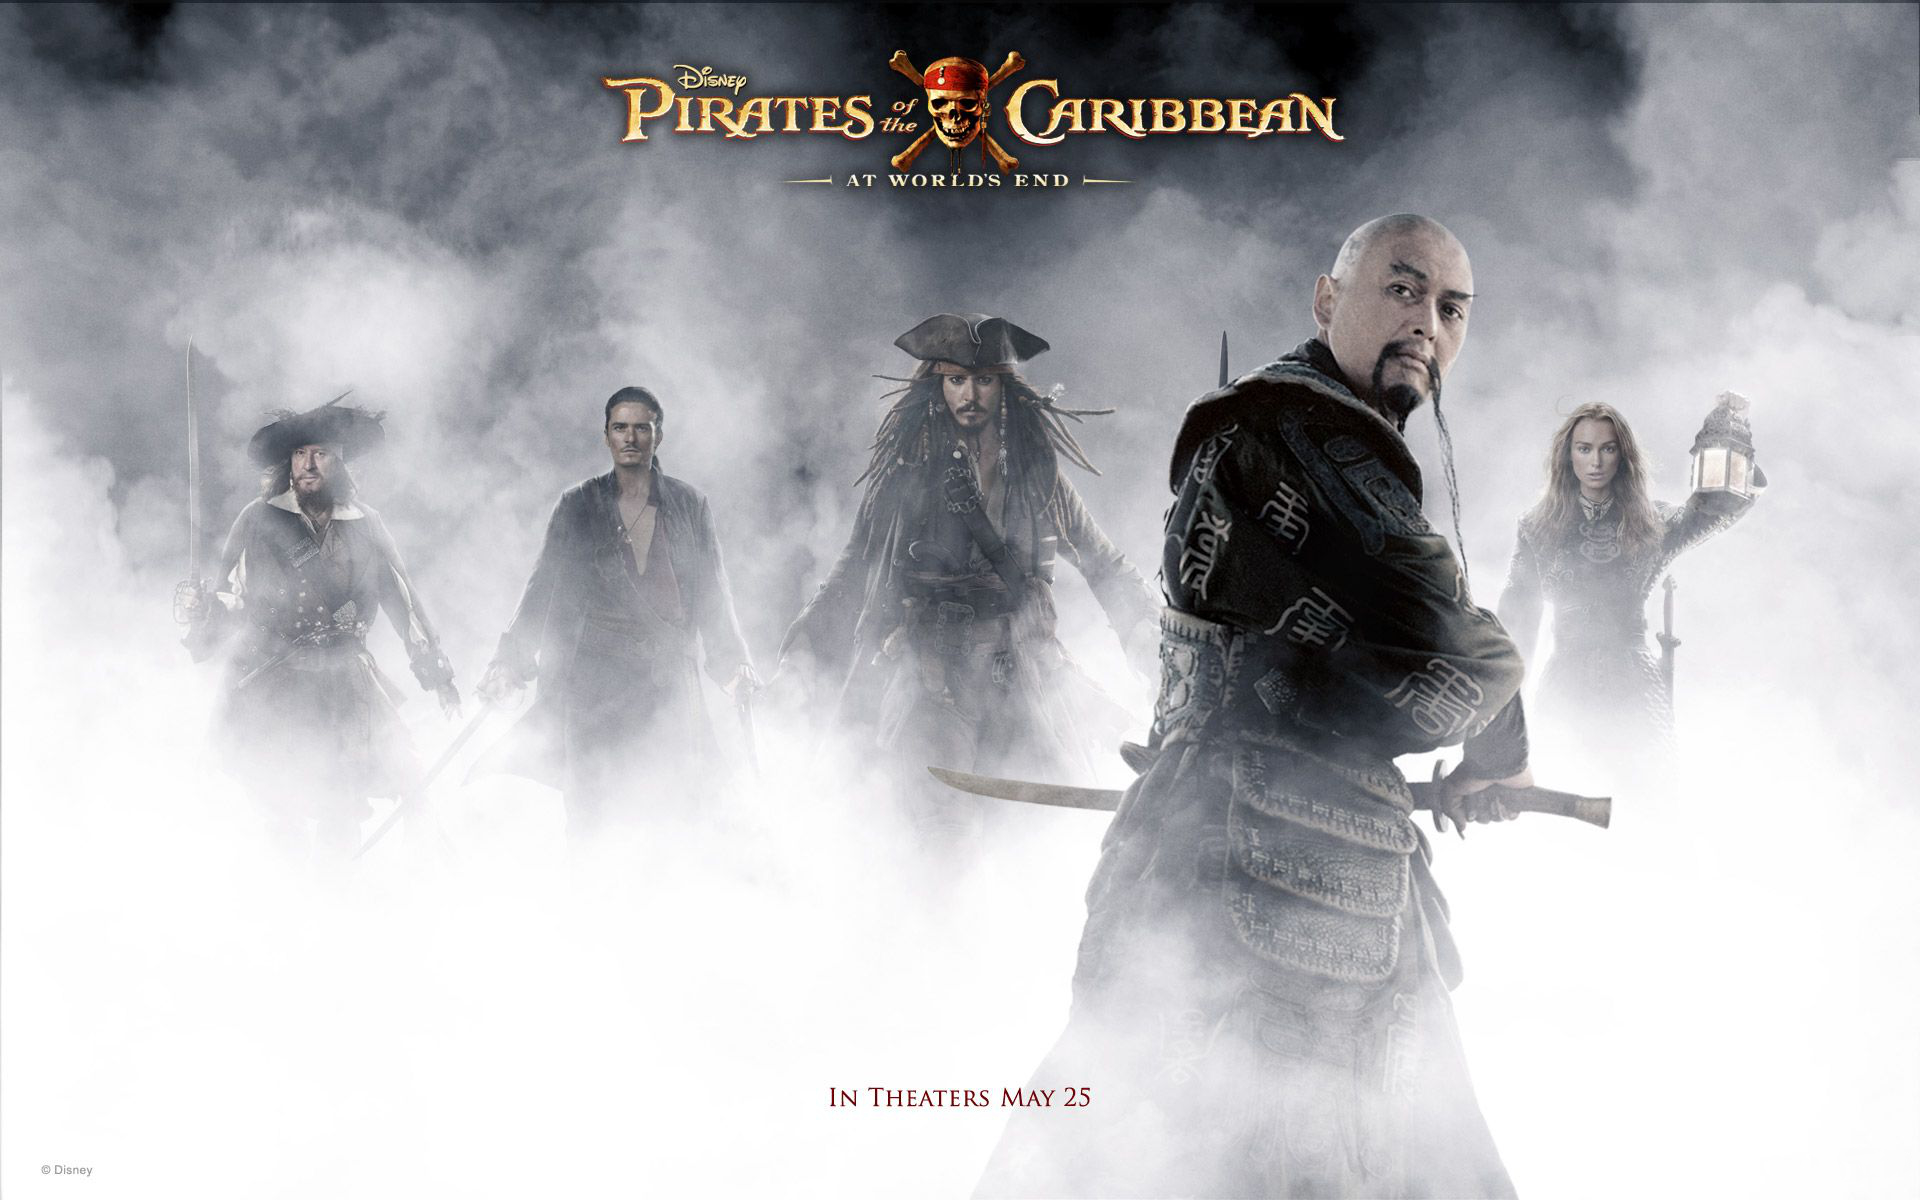 movie, pirates of the caribbean: at world's end, captain sao feng, chow yun fat, elizabeth swann, geoffrey rush, hector barbossa, jack sparrow, johnny depp, keira knightley, orlando bloom, will turner, pirates of the caribbean 1080p